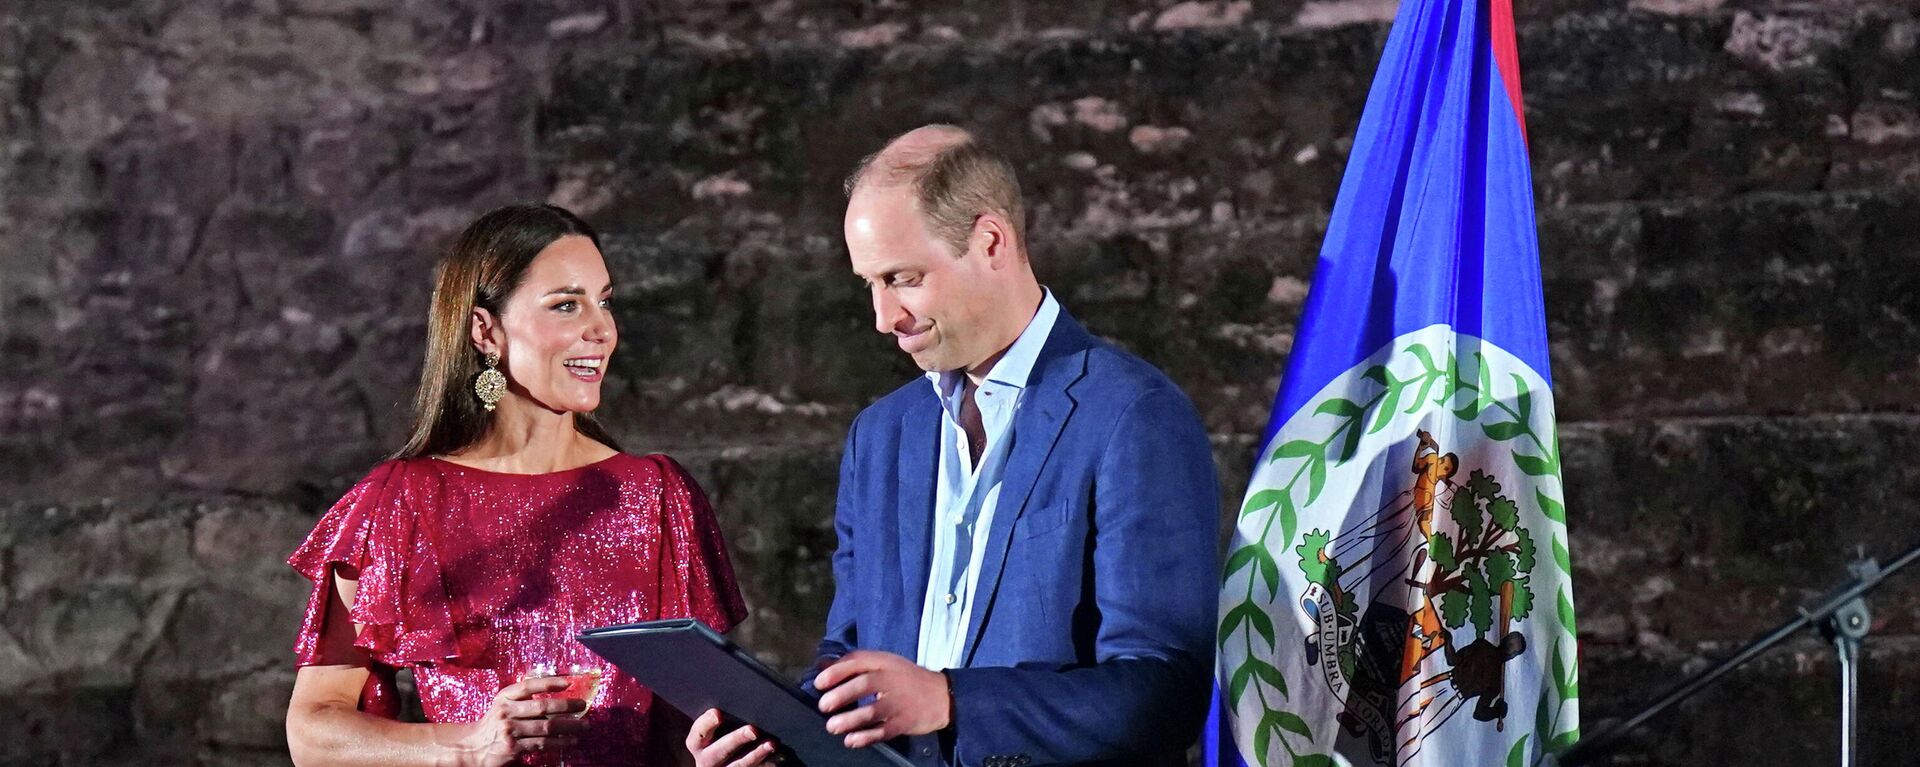 Prince William and Catherine, Duchess of Cambridge attend a special reception in celebration of the Queen's Platinum Jubilee, hosted by the Governor General of Belize Froyla Tzalam, on the third day of their tour of the Caribbean, at the Mayan ruins at Cahal Pech, Belize, March 21, 2022.  - Sputnik International, 1920, 22.03.2022